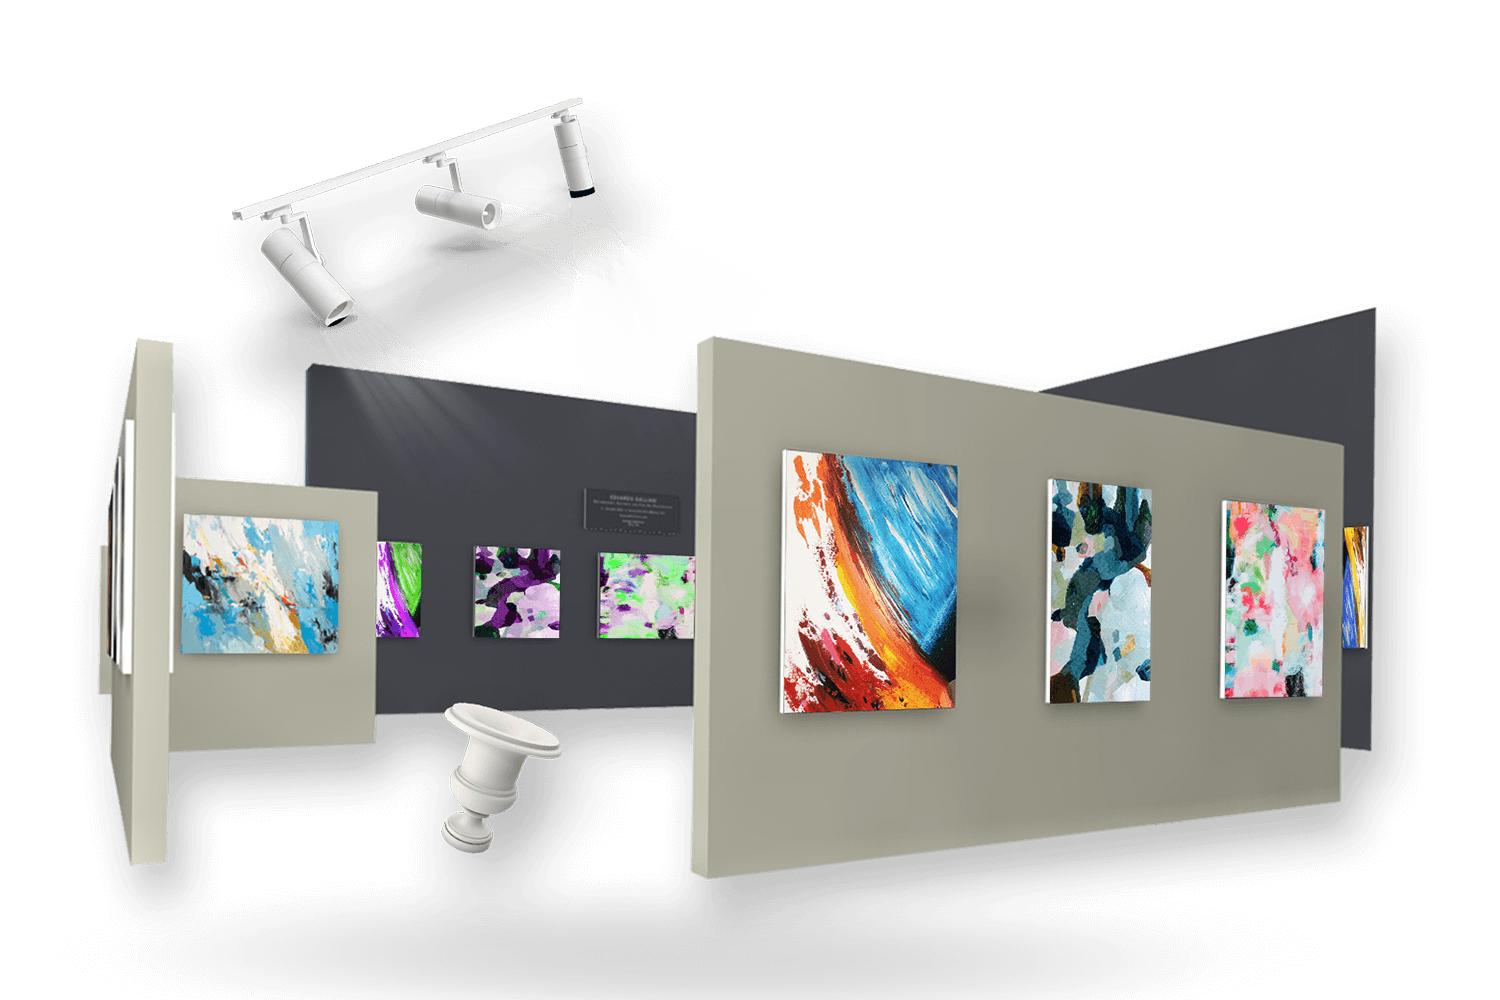 Your Dream Space … We Make it a Virtual Reality Engage your customers and audience in a virtual world of your choice. A 3D digitally-created interactive virtual store, showroom, exhibition, event, or space that serves your purpose.